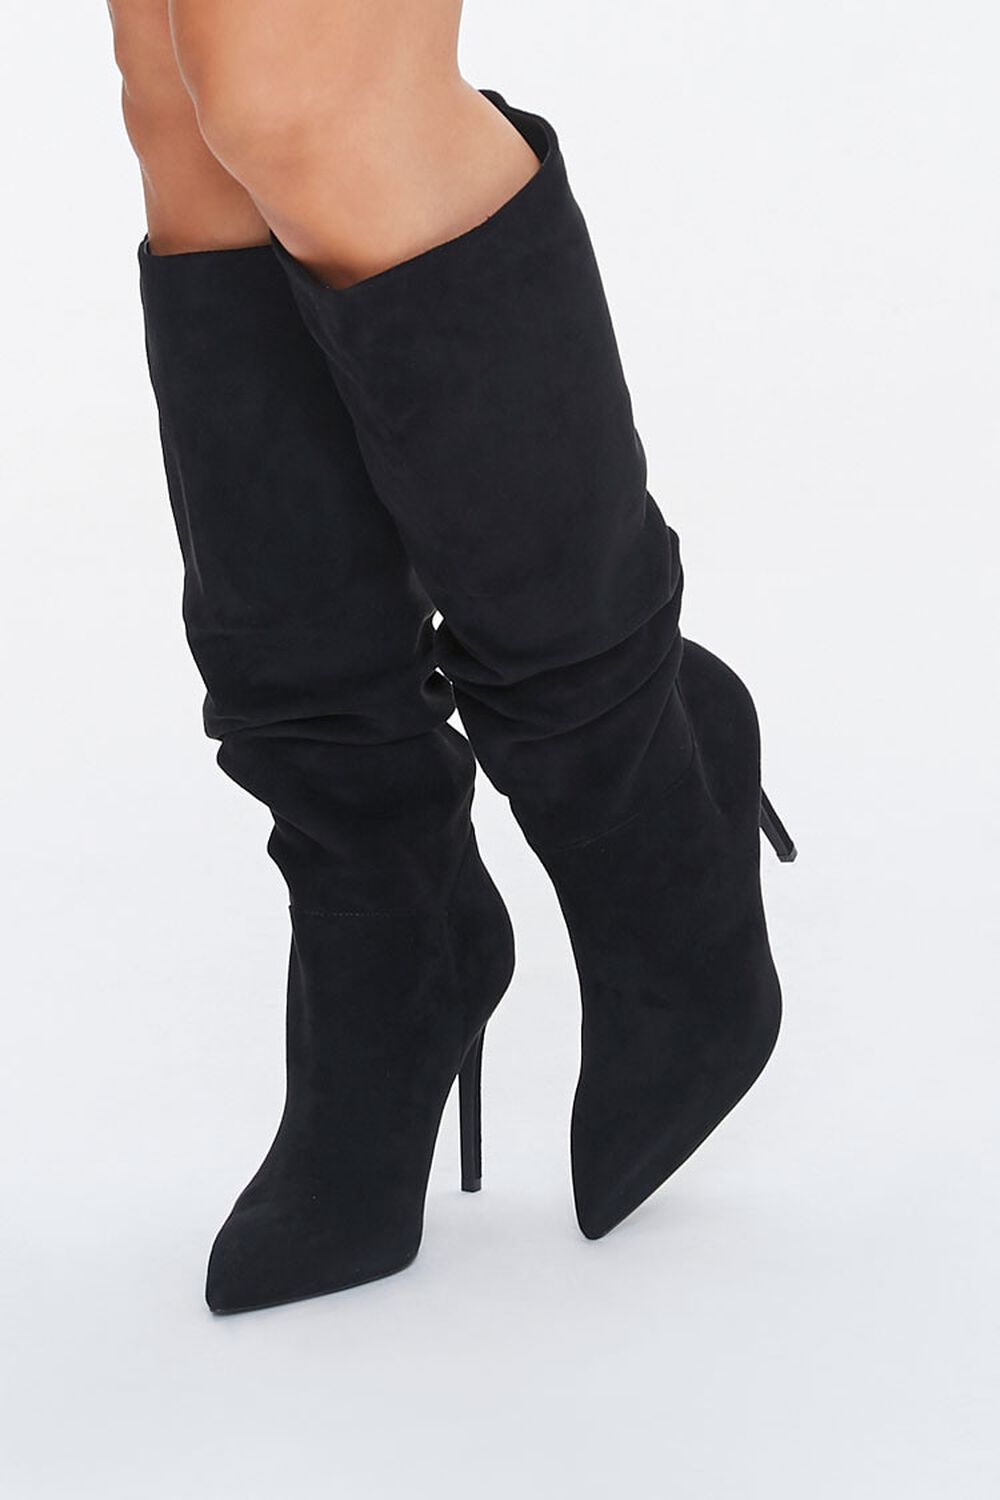 Slouchy Stiletto Knee-High Boots